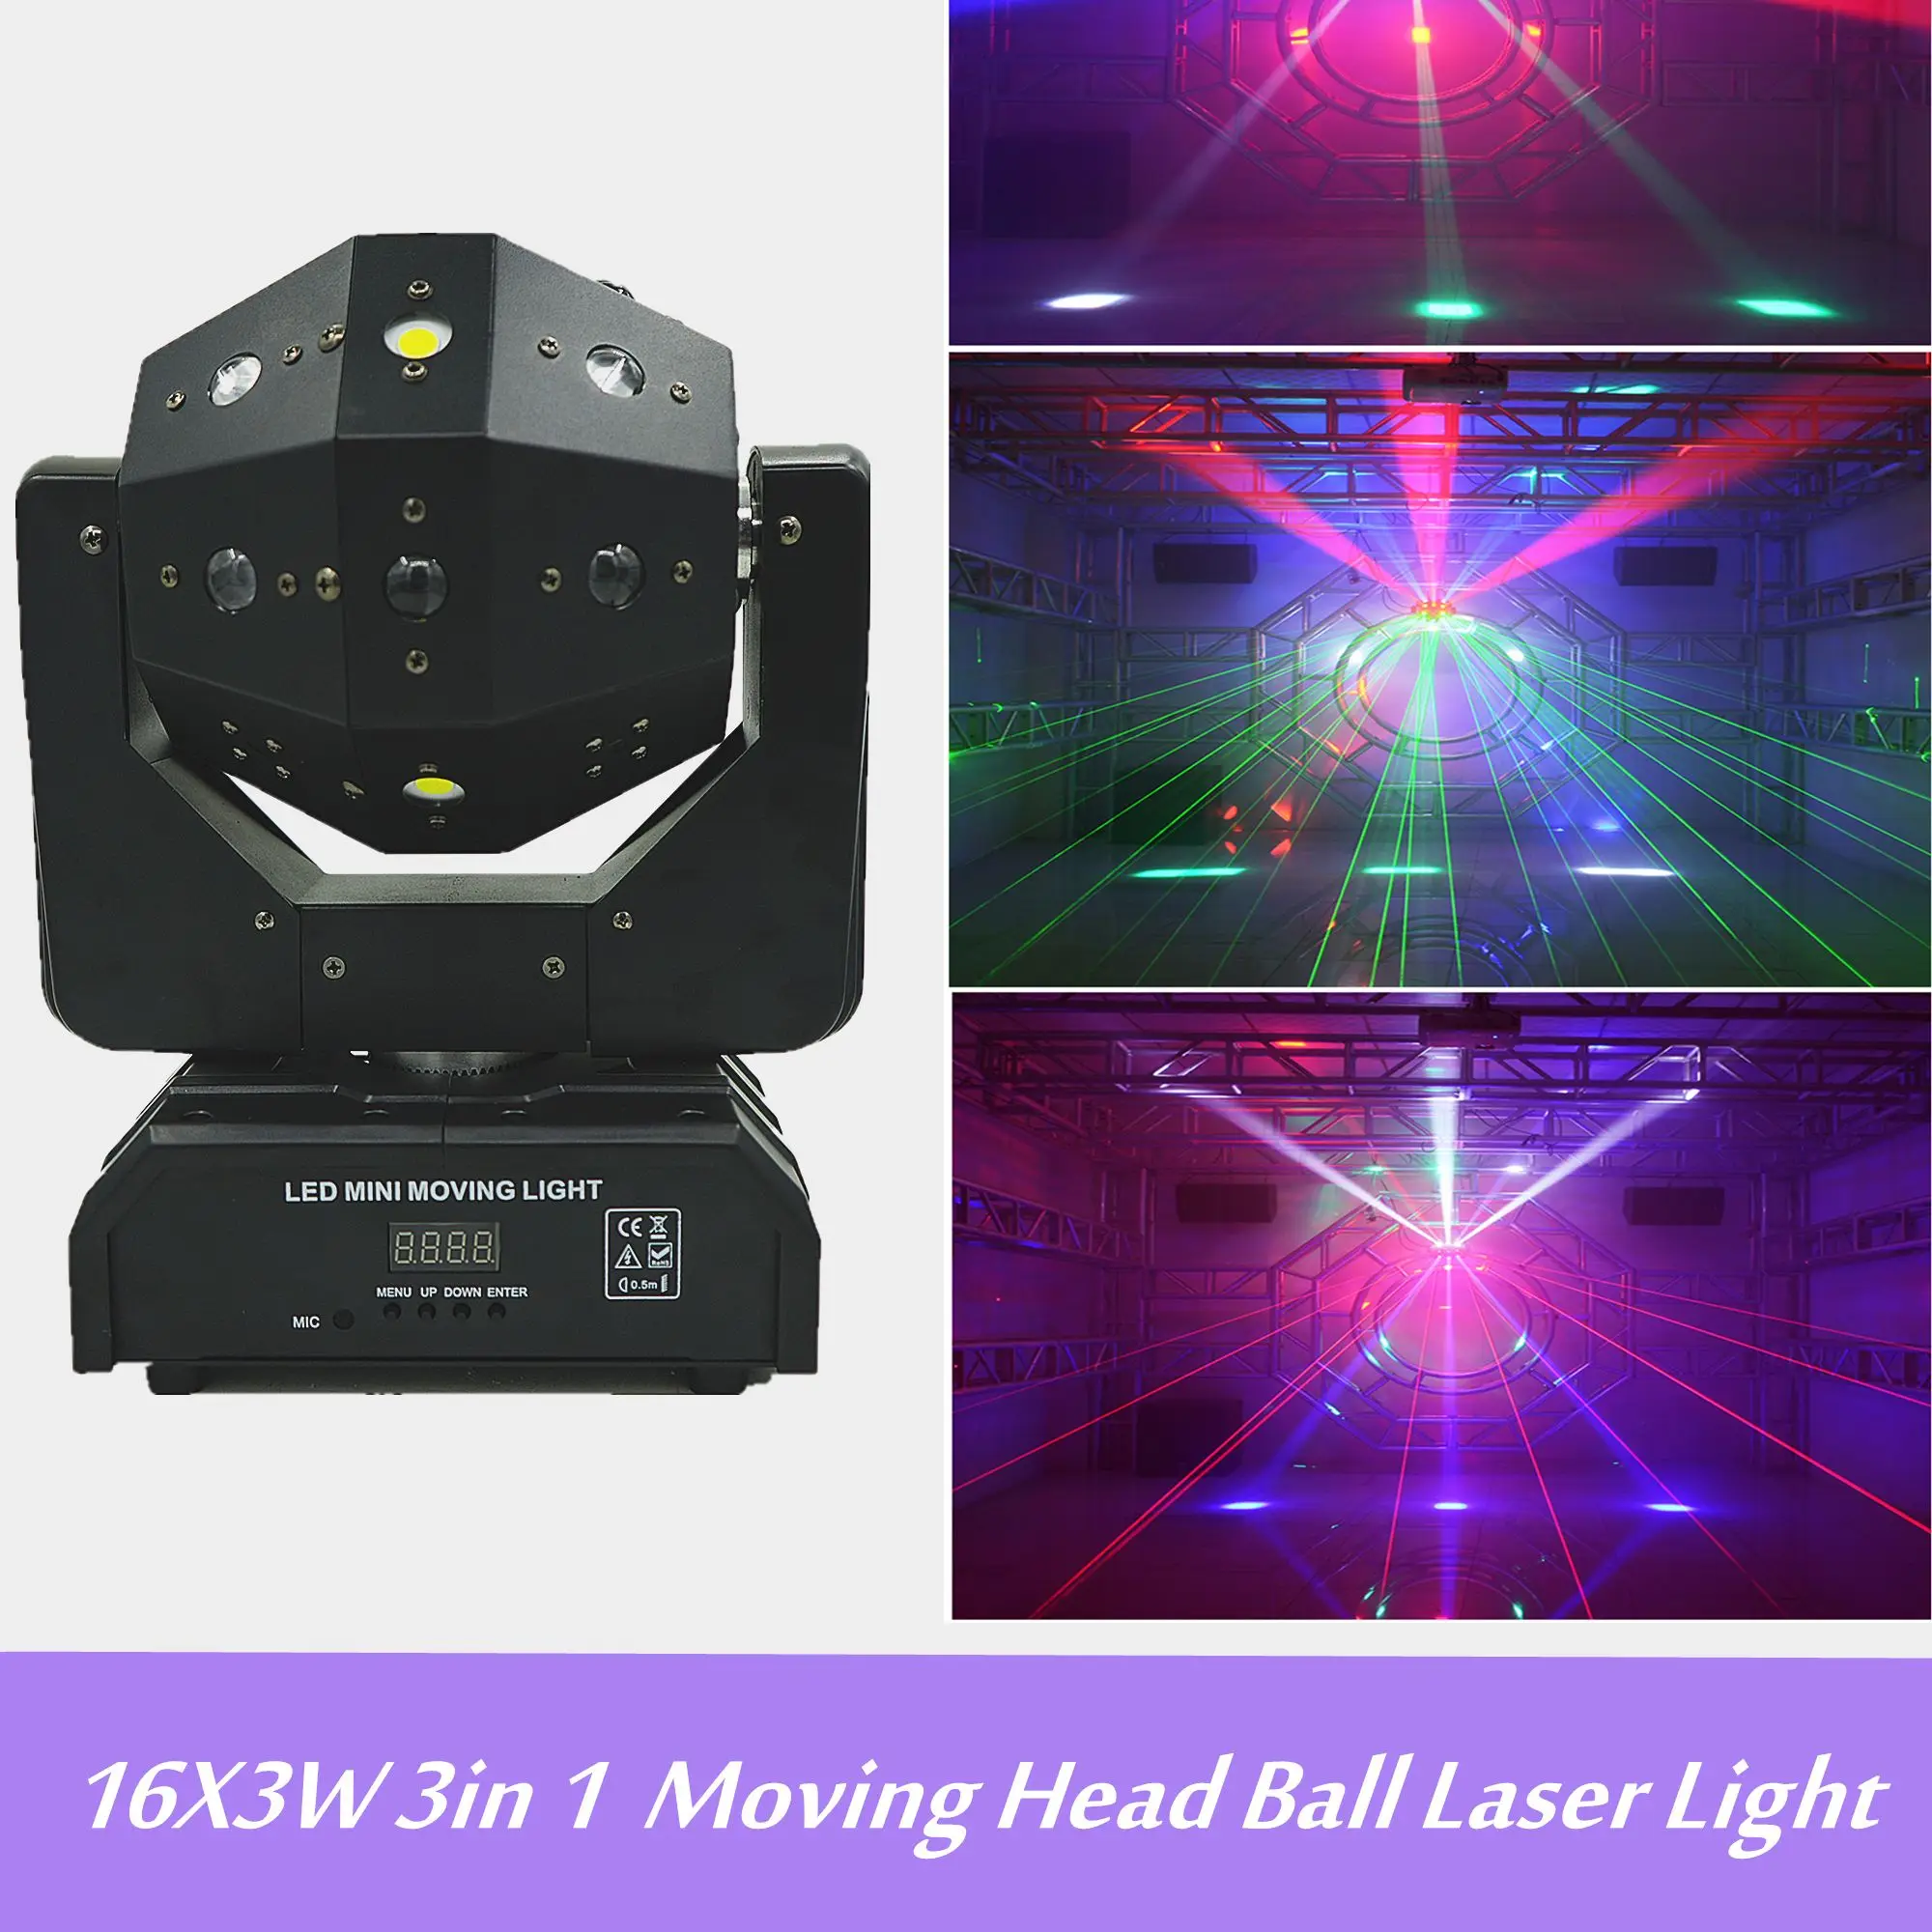 

16X3W 3in1 Laser for DJ disco party stage ball lights Moving Head Light Laser Rock Stage Rotating Bar Light